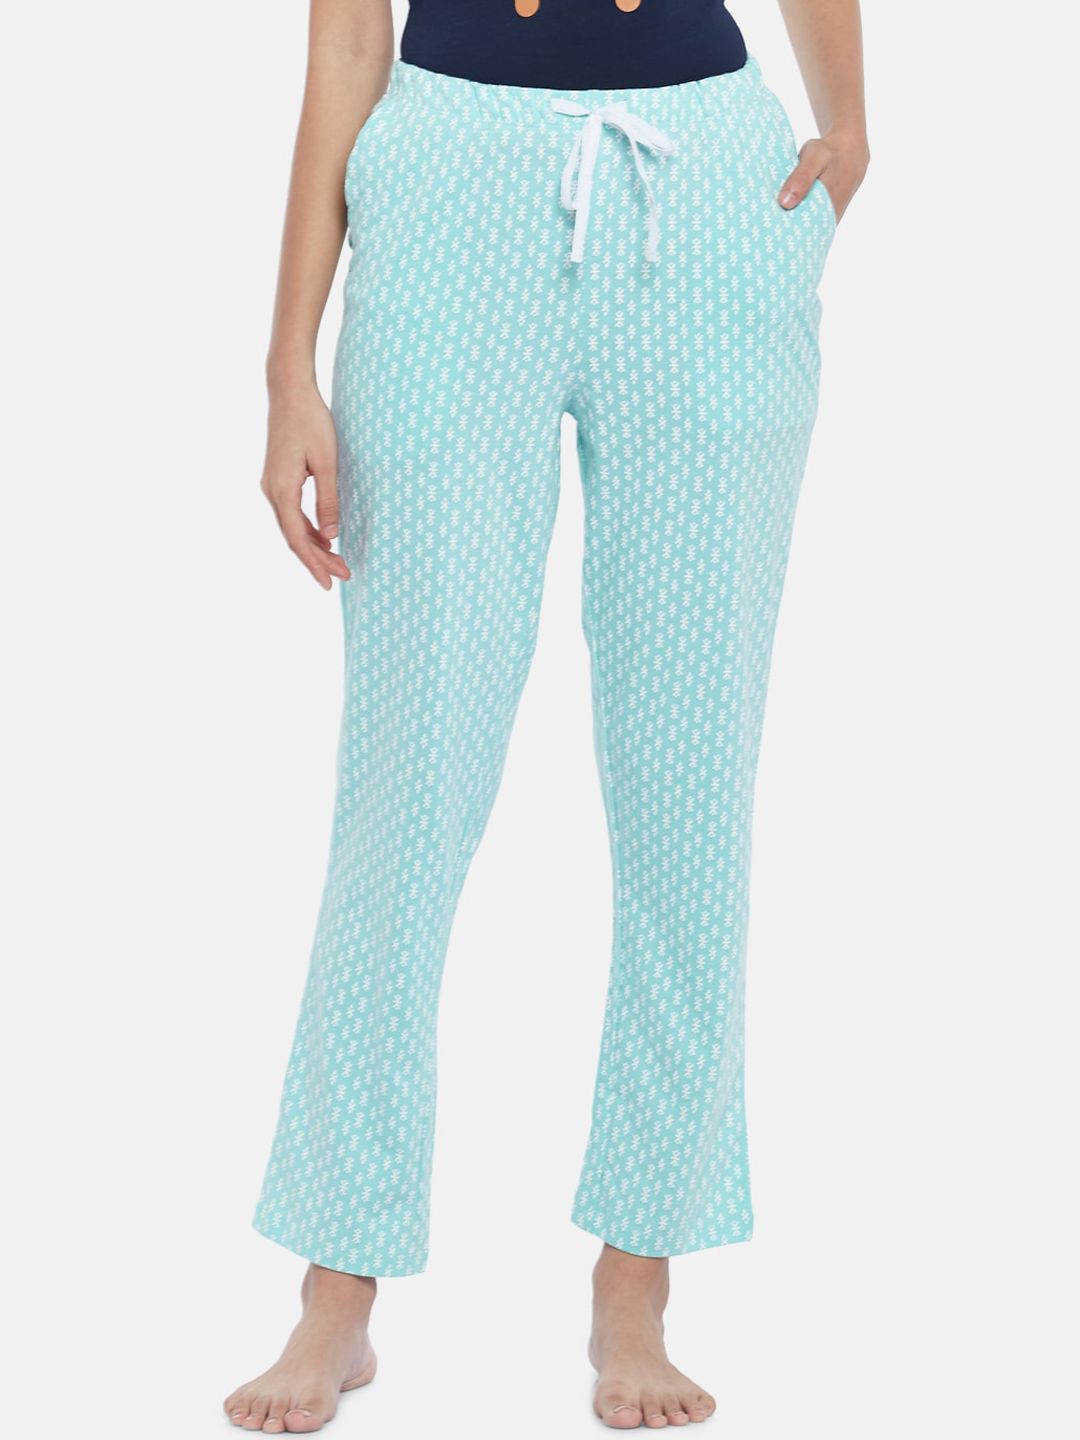 Dreamz by Pantaloons Women Blue Cotton Printed Lounge Pants Price in India